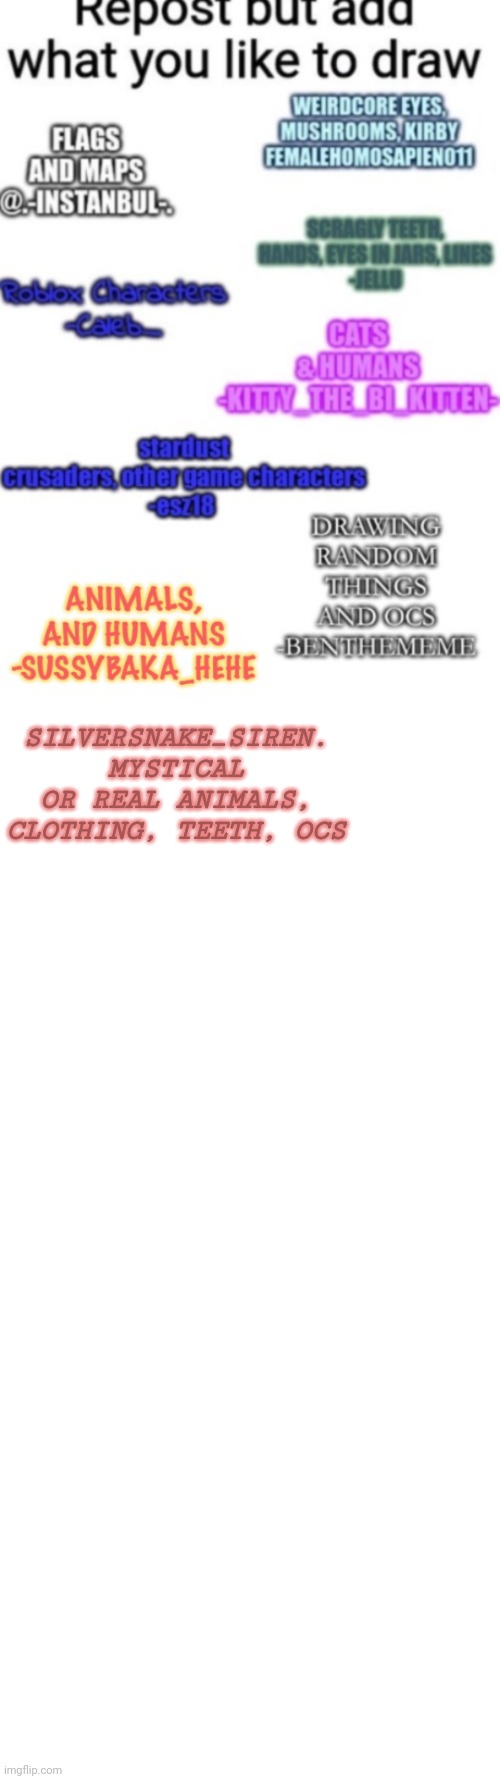 It's been a while since i posted so this is a little update that I'm still alive :) | SILVERSNAKE_SIREN.
MYSTICAL OR REAL ANIMALS, CLOTHING, TEETH, OCS | made w/ Imgflip meme maker